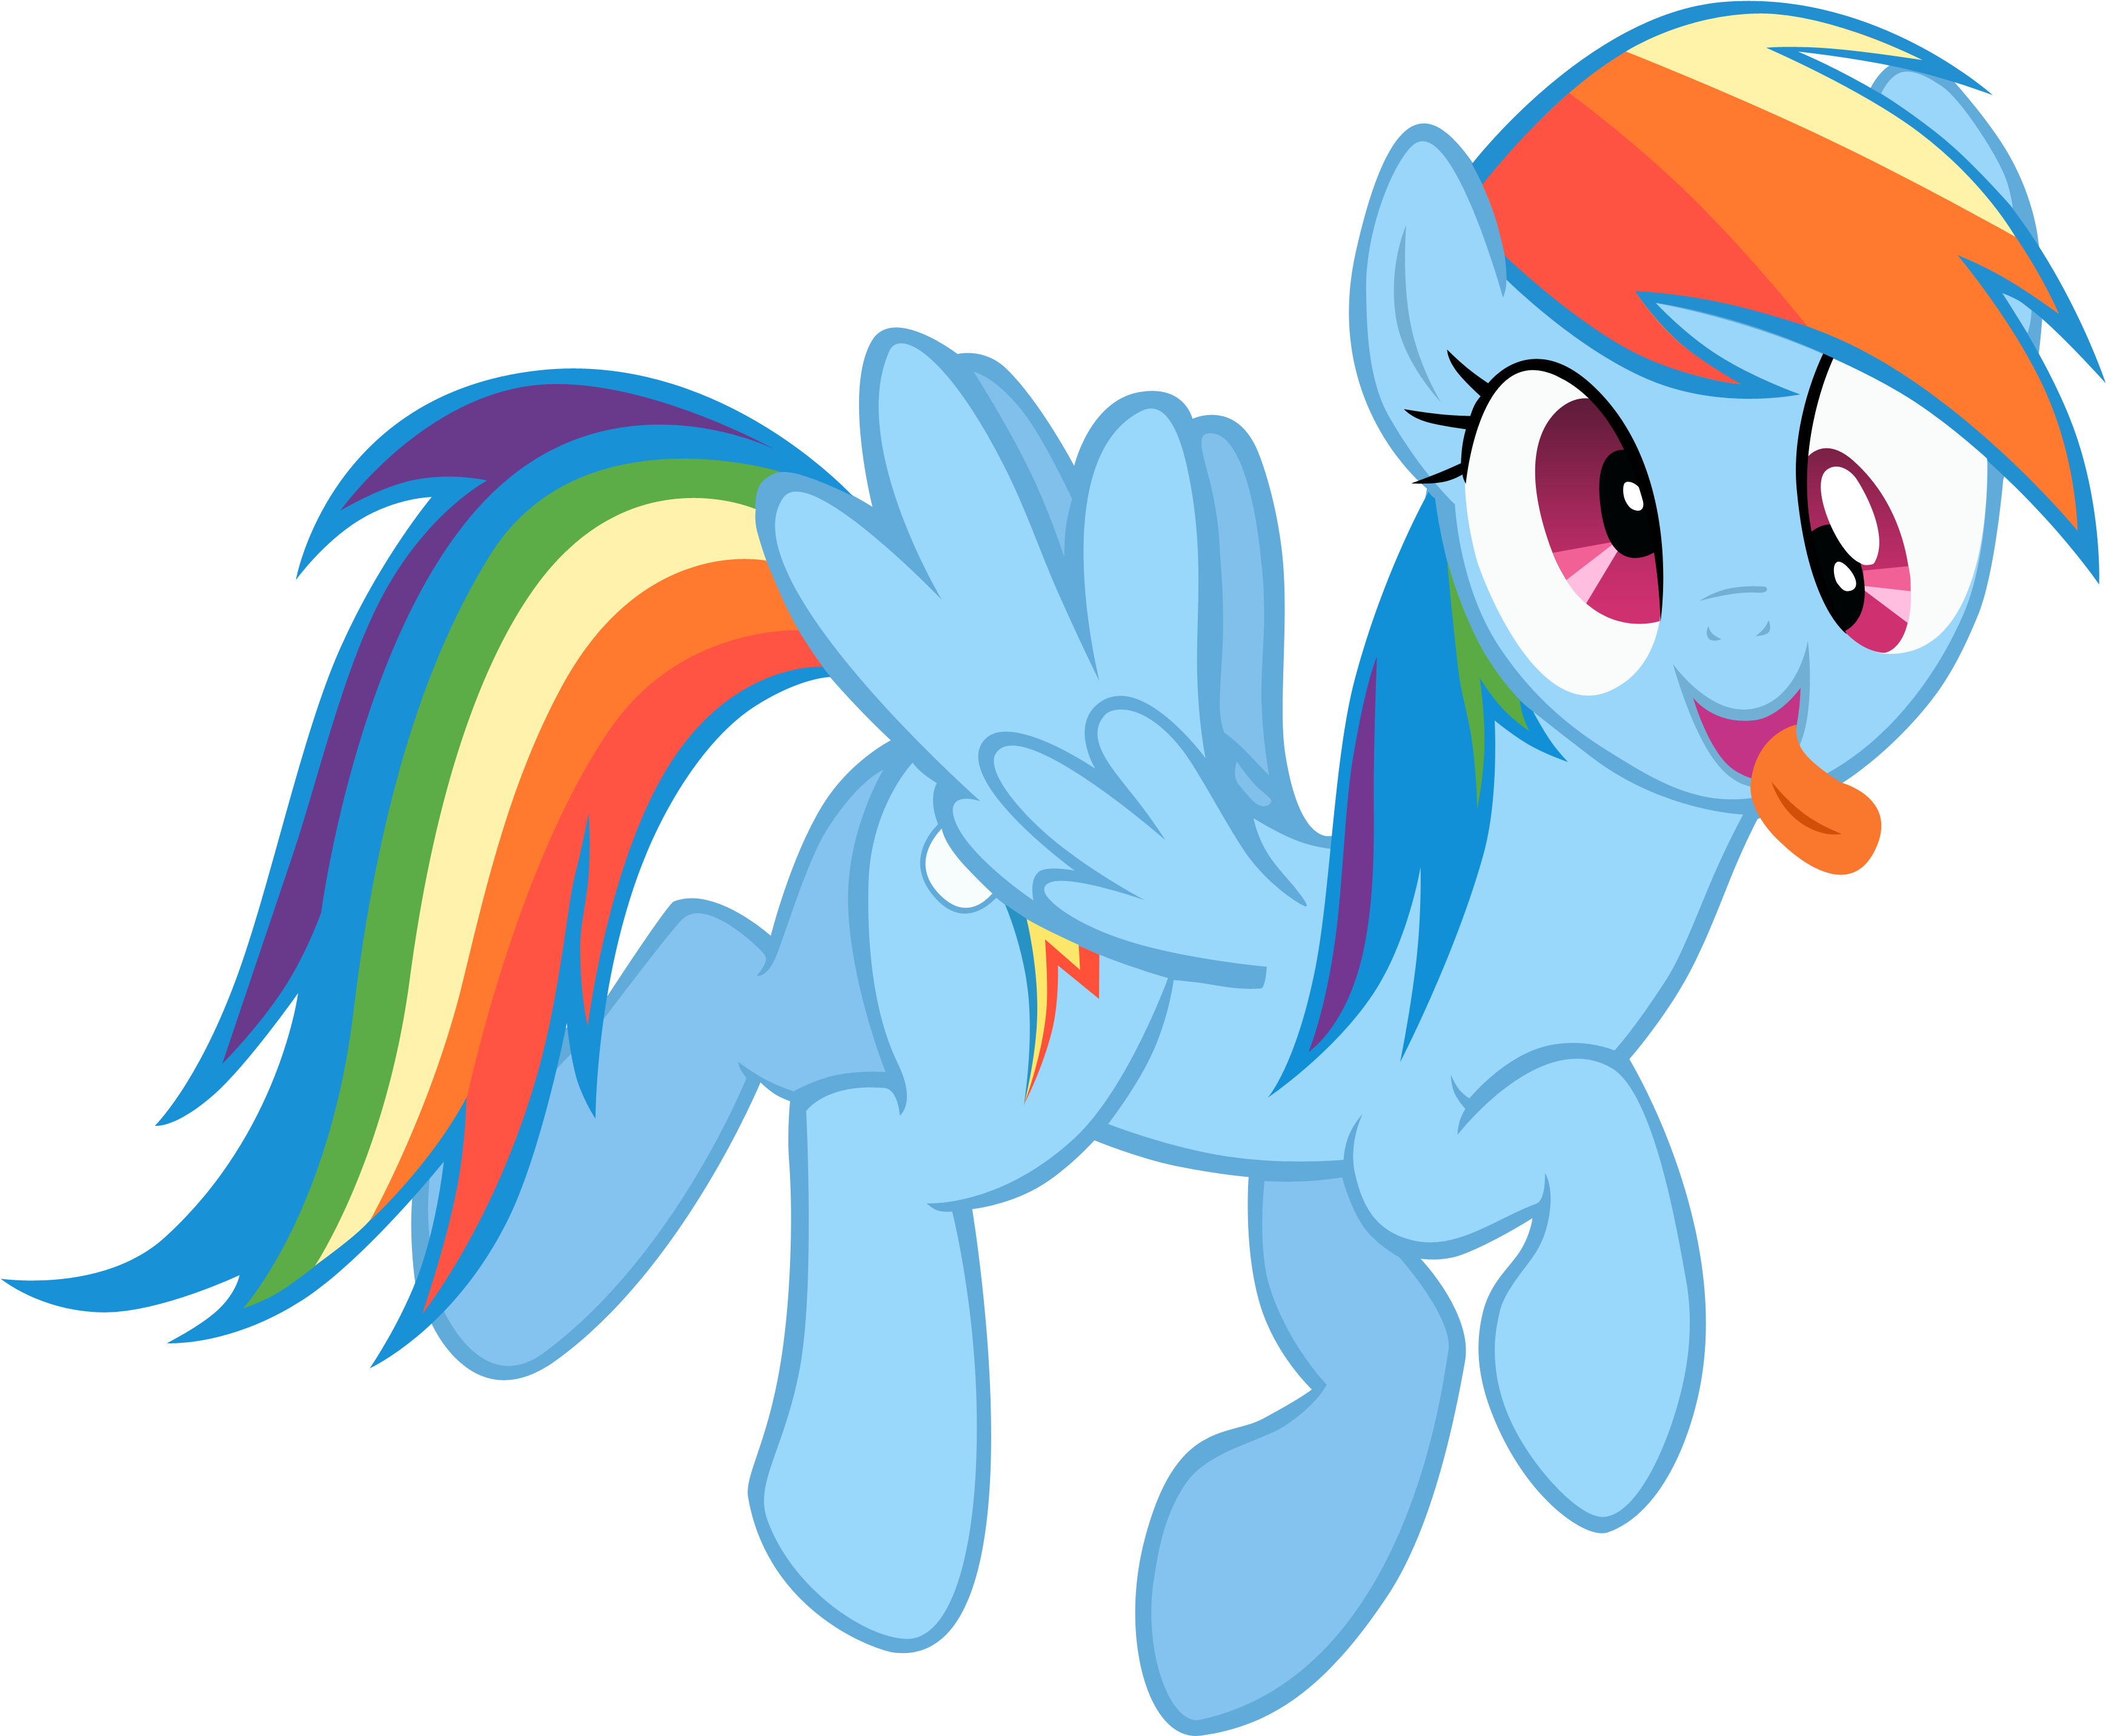 Another Thing Is You're Missing A Little Line On The - Rainbow Dash Shy (3642x3000)